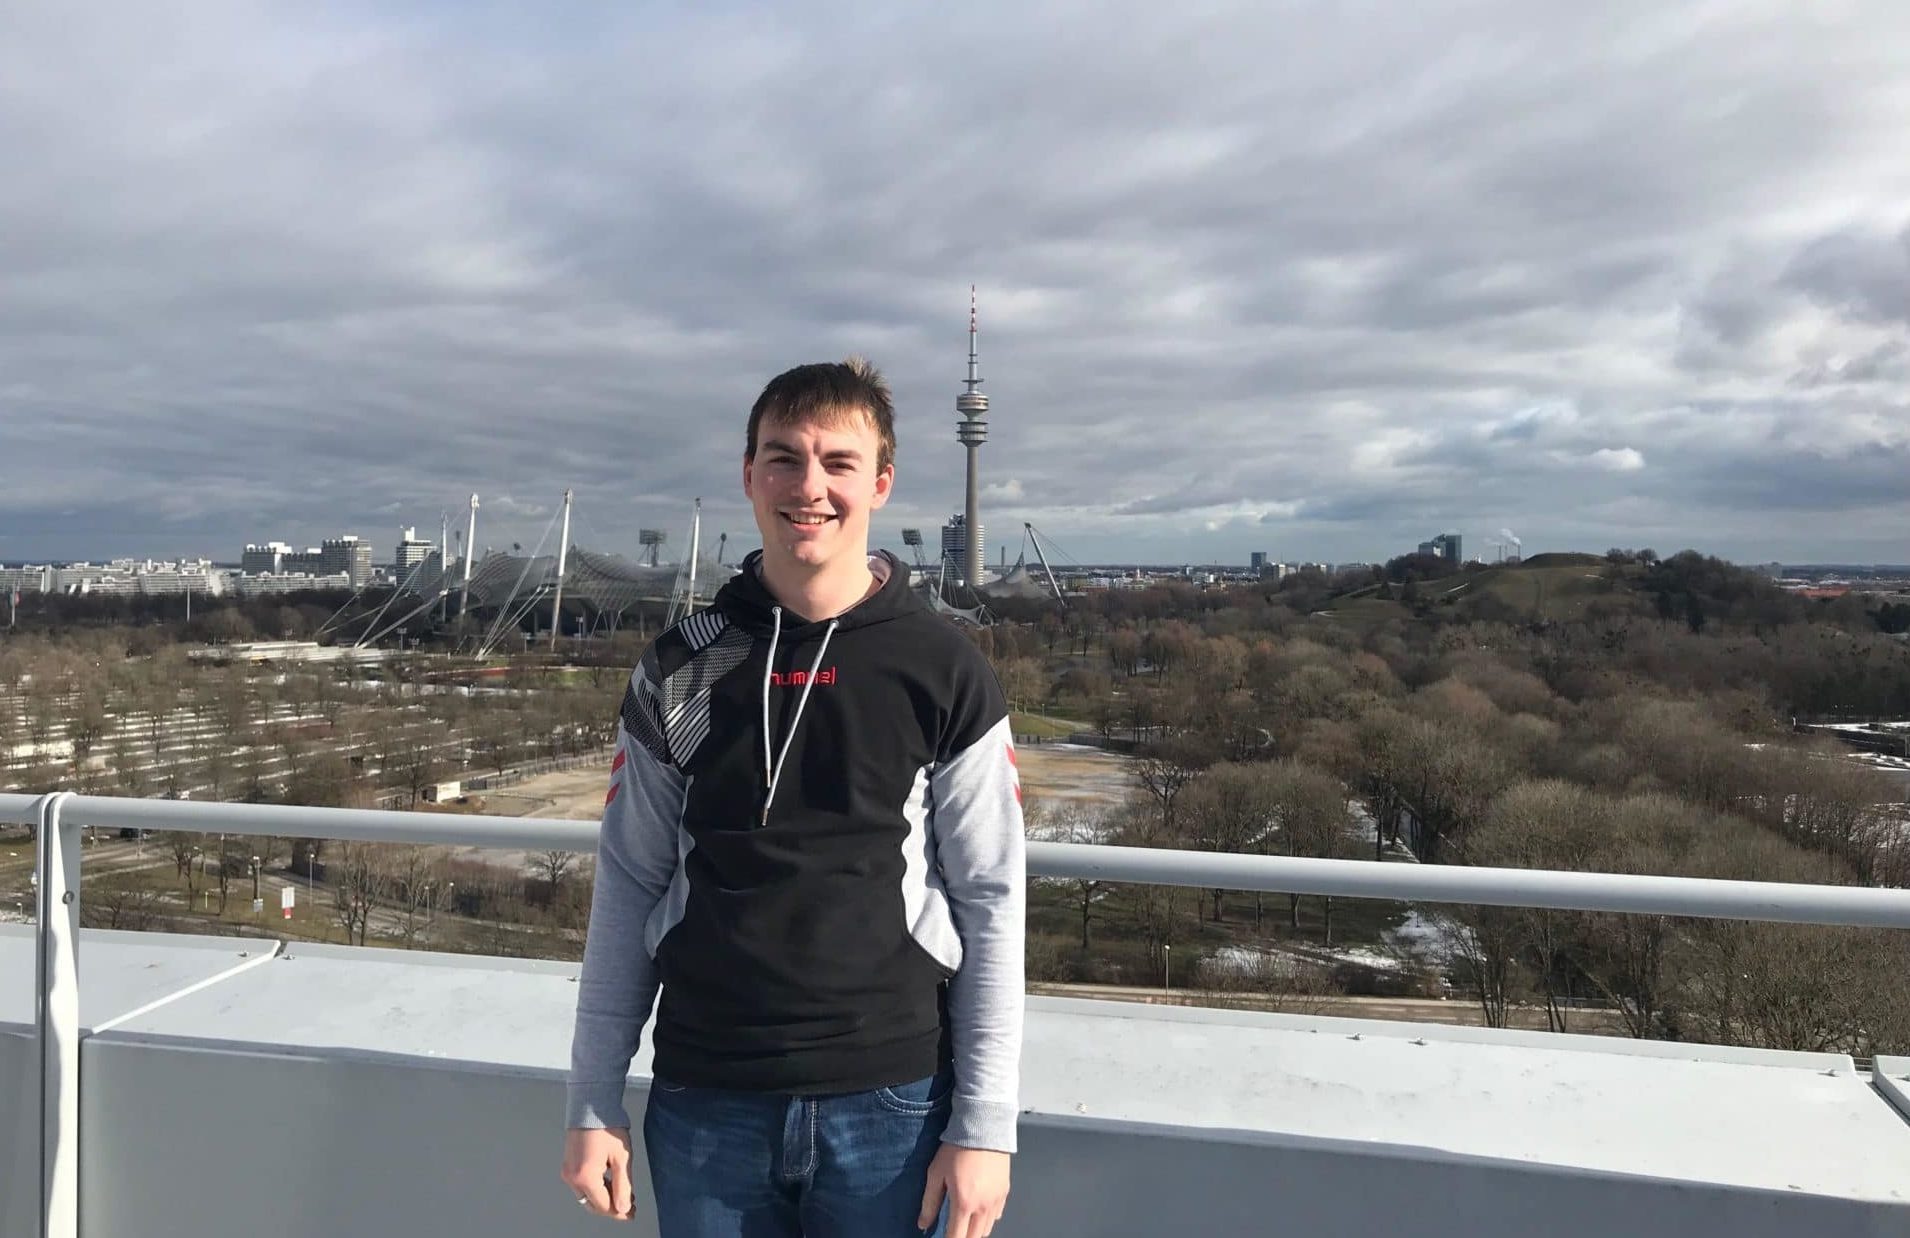 Maximilian Ries is our new Data Science intern.